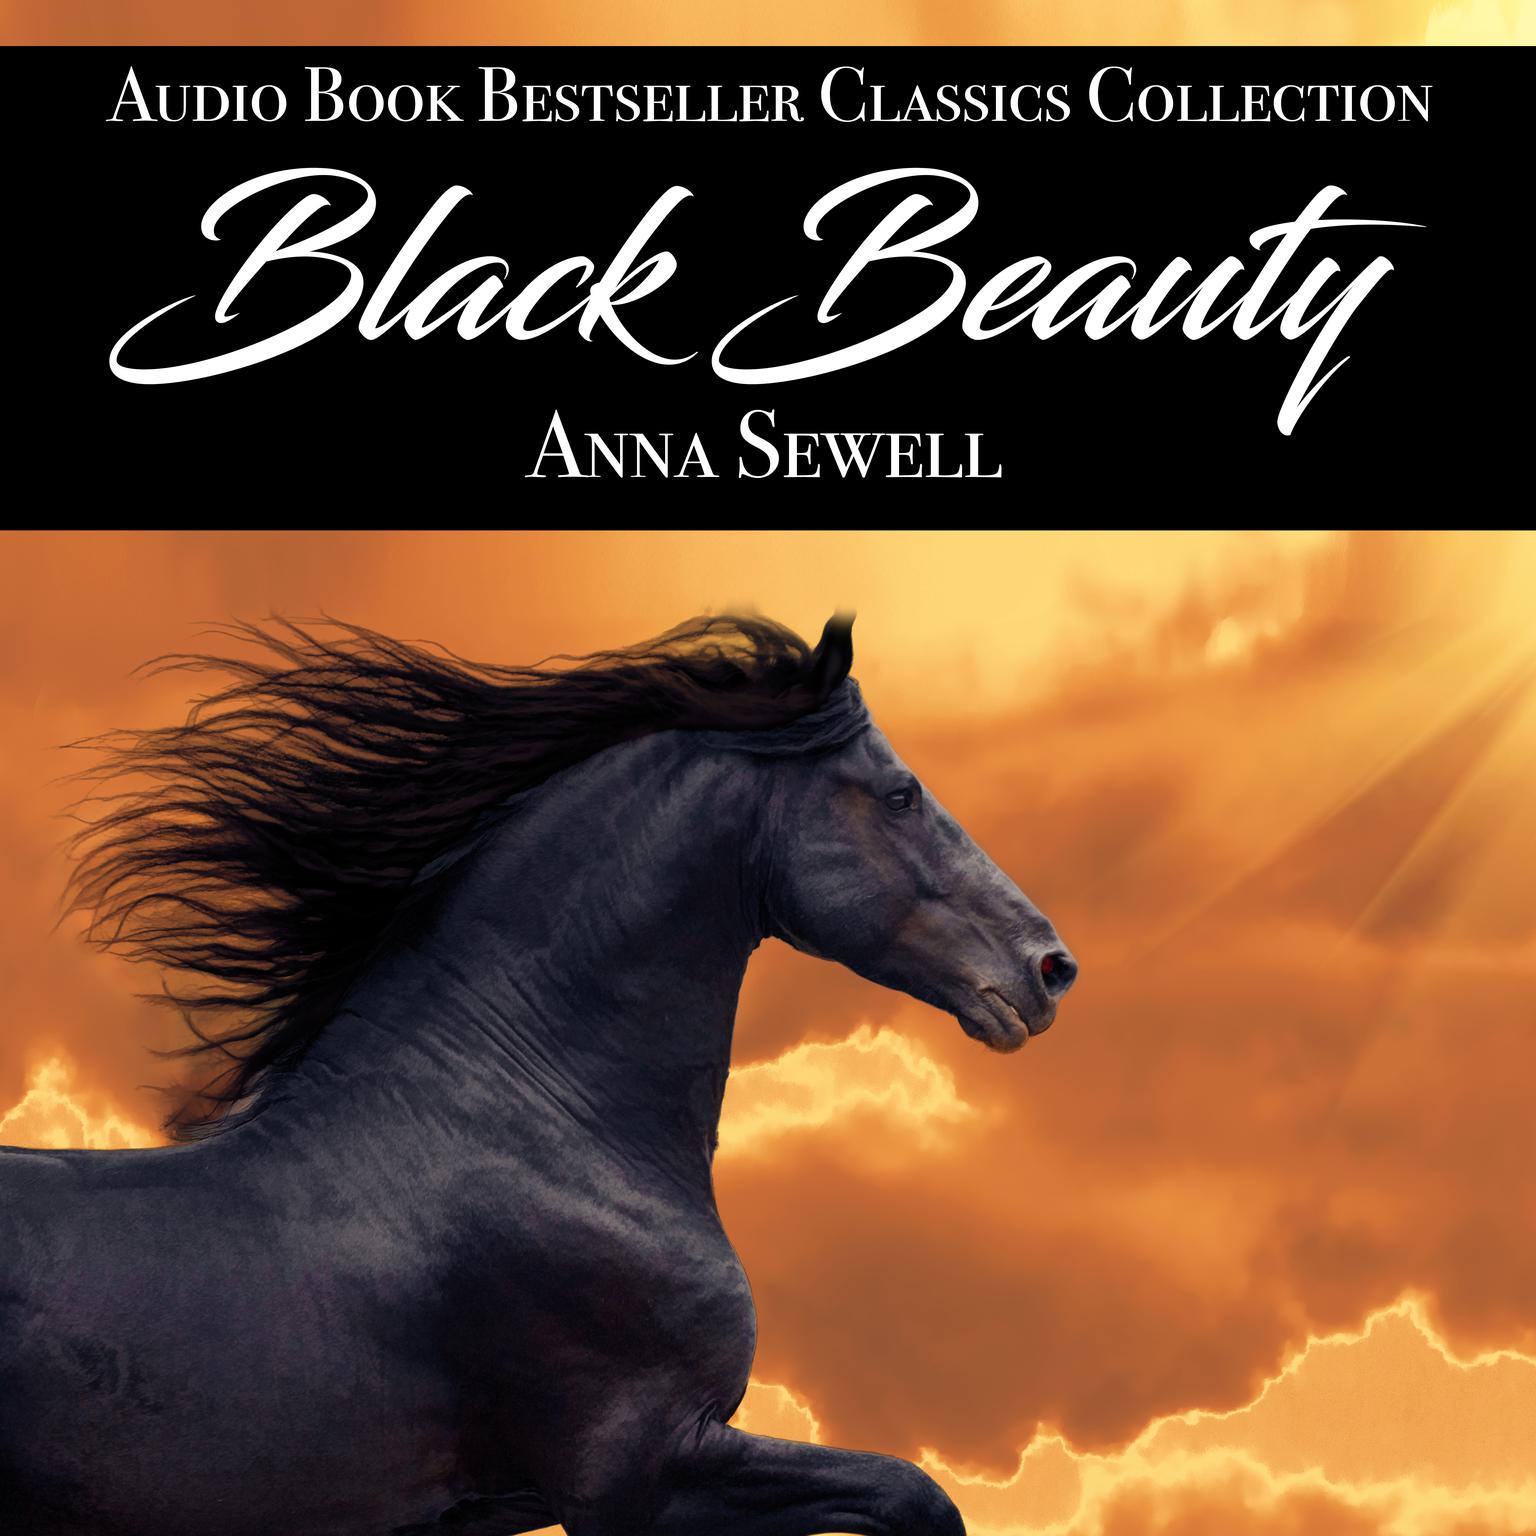 Black Beauty (Abridged) Audiobook, by Anna Sewell